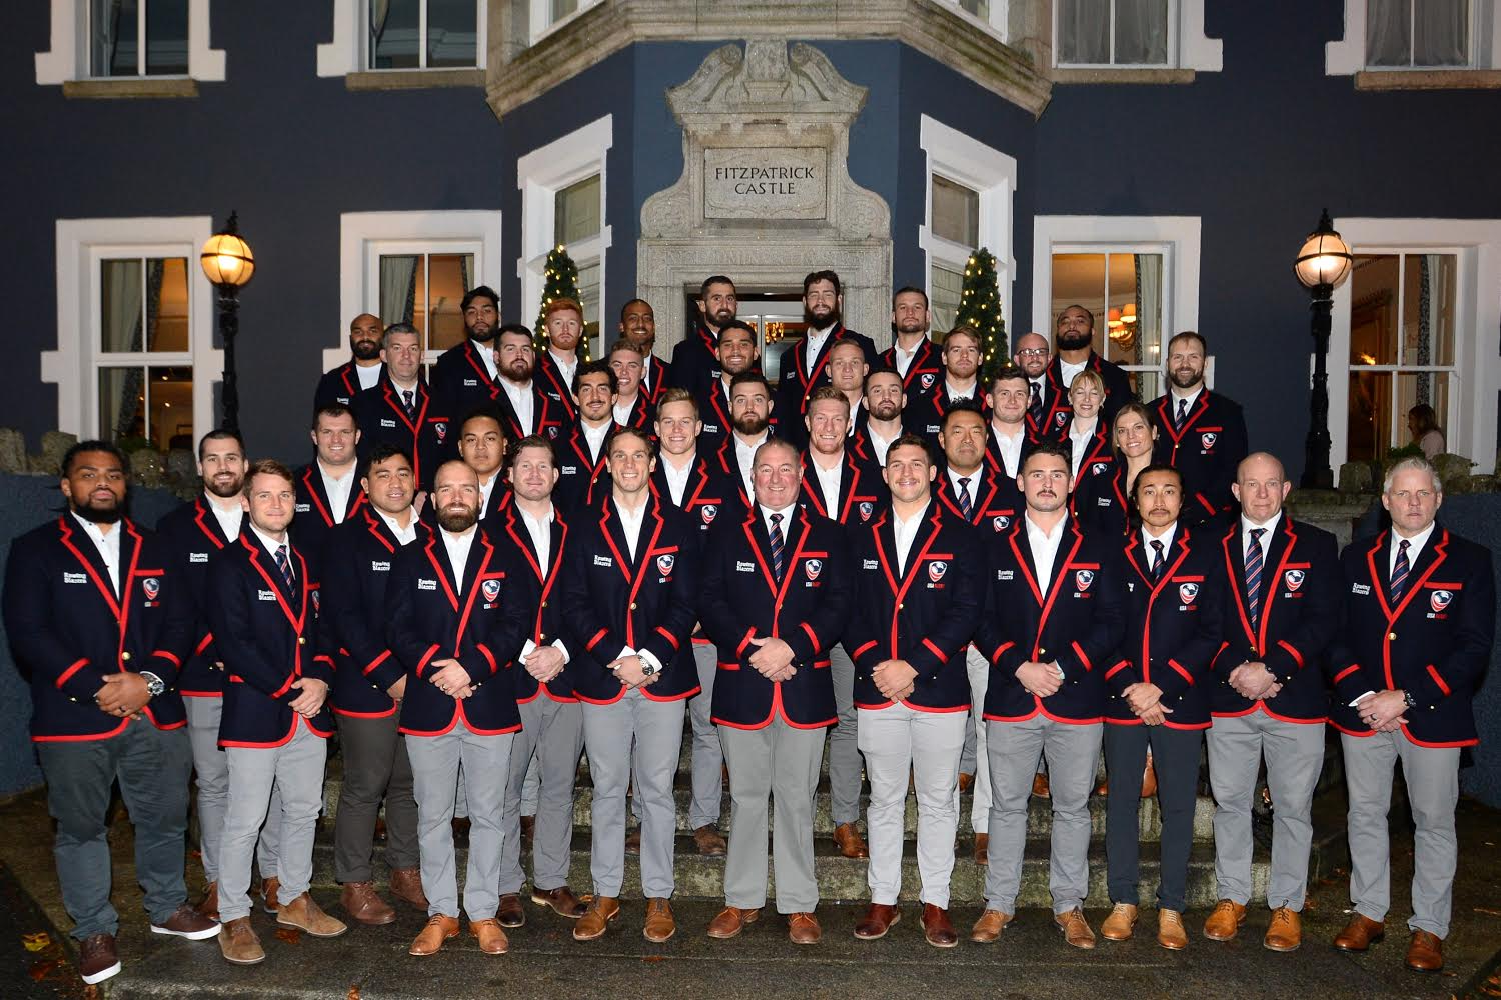 Proud partners of USA Rugby (Rowing Blazers is honored to be the official outfitter of the U.S. men's and women's national rugby teams)